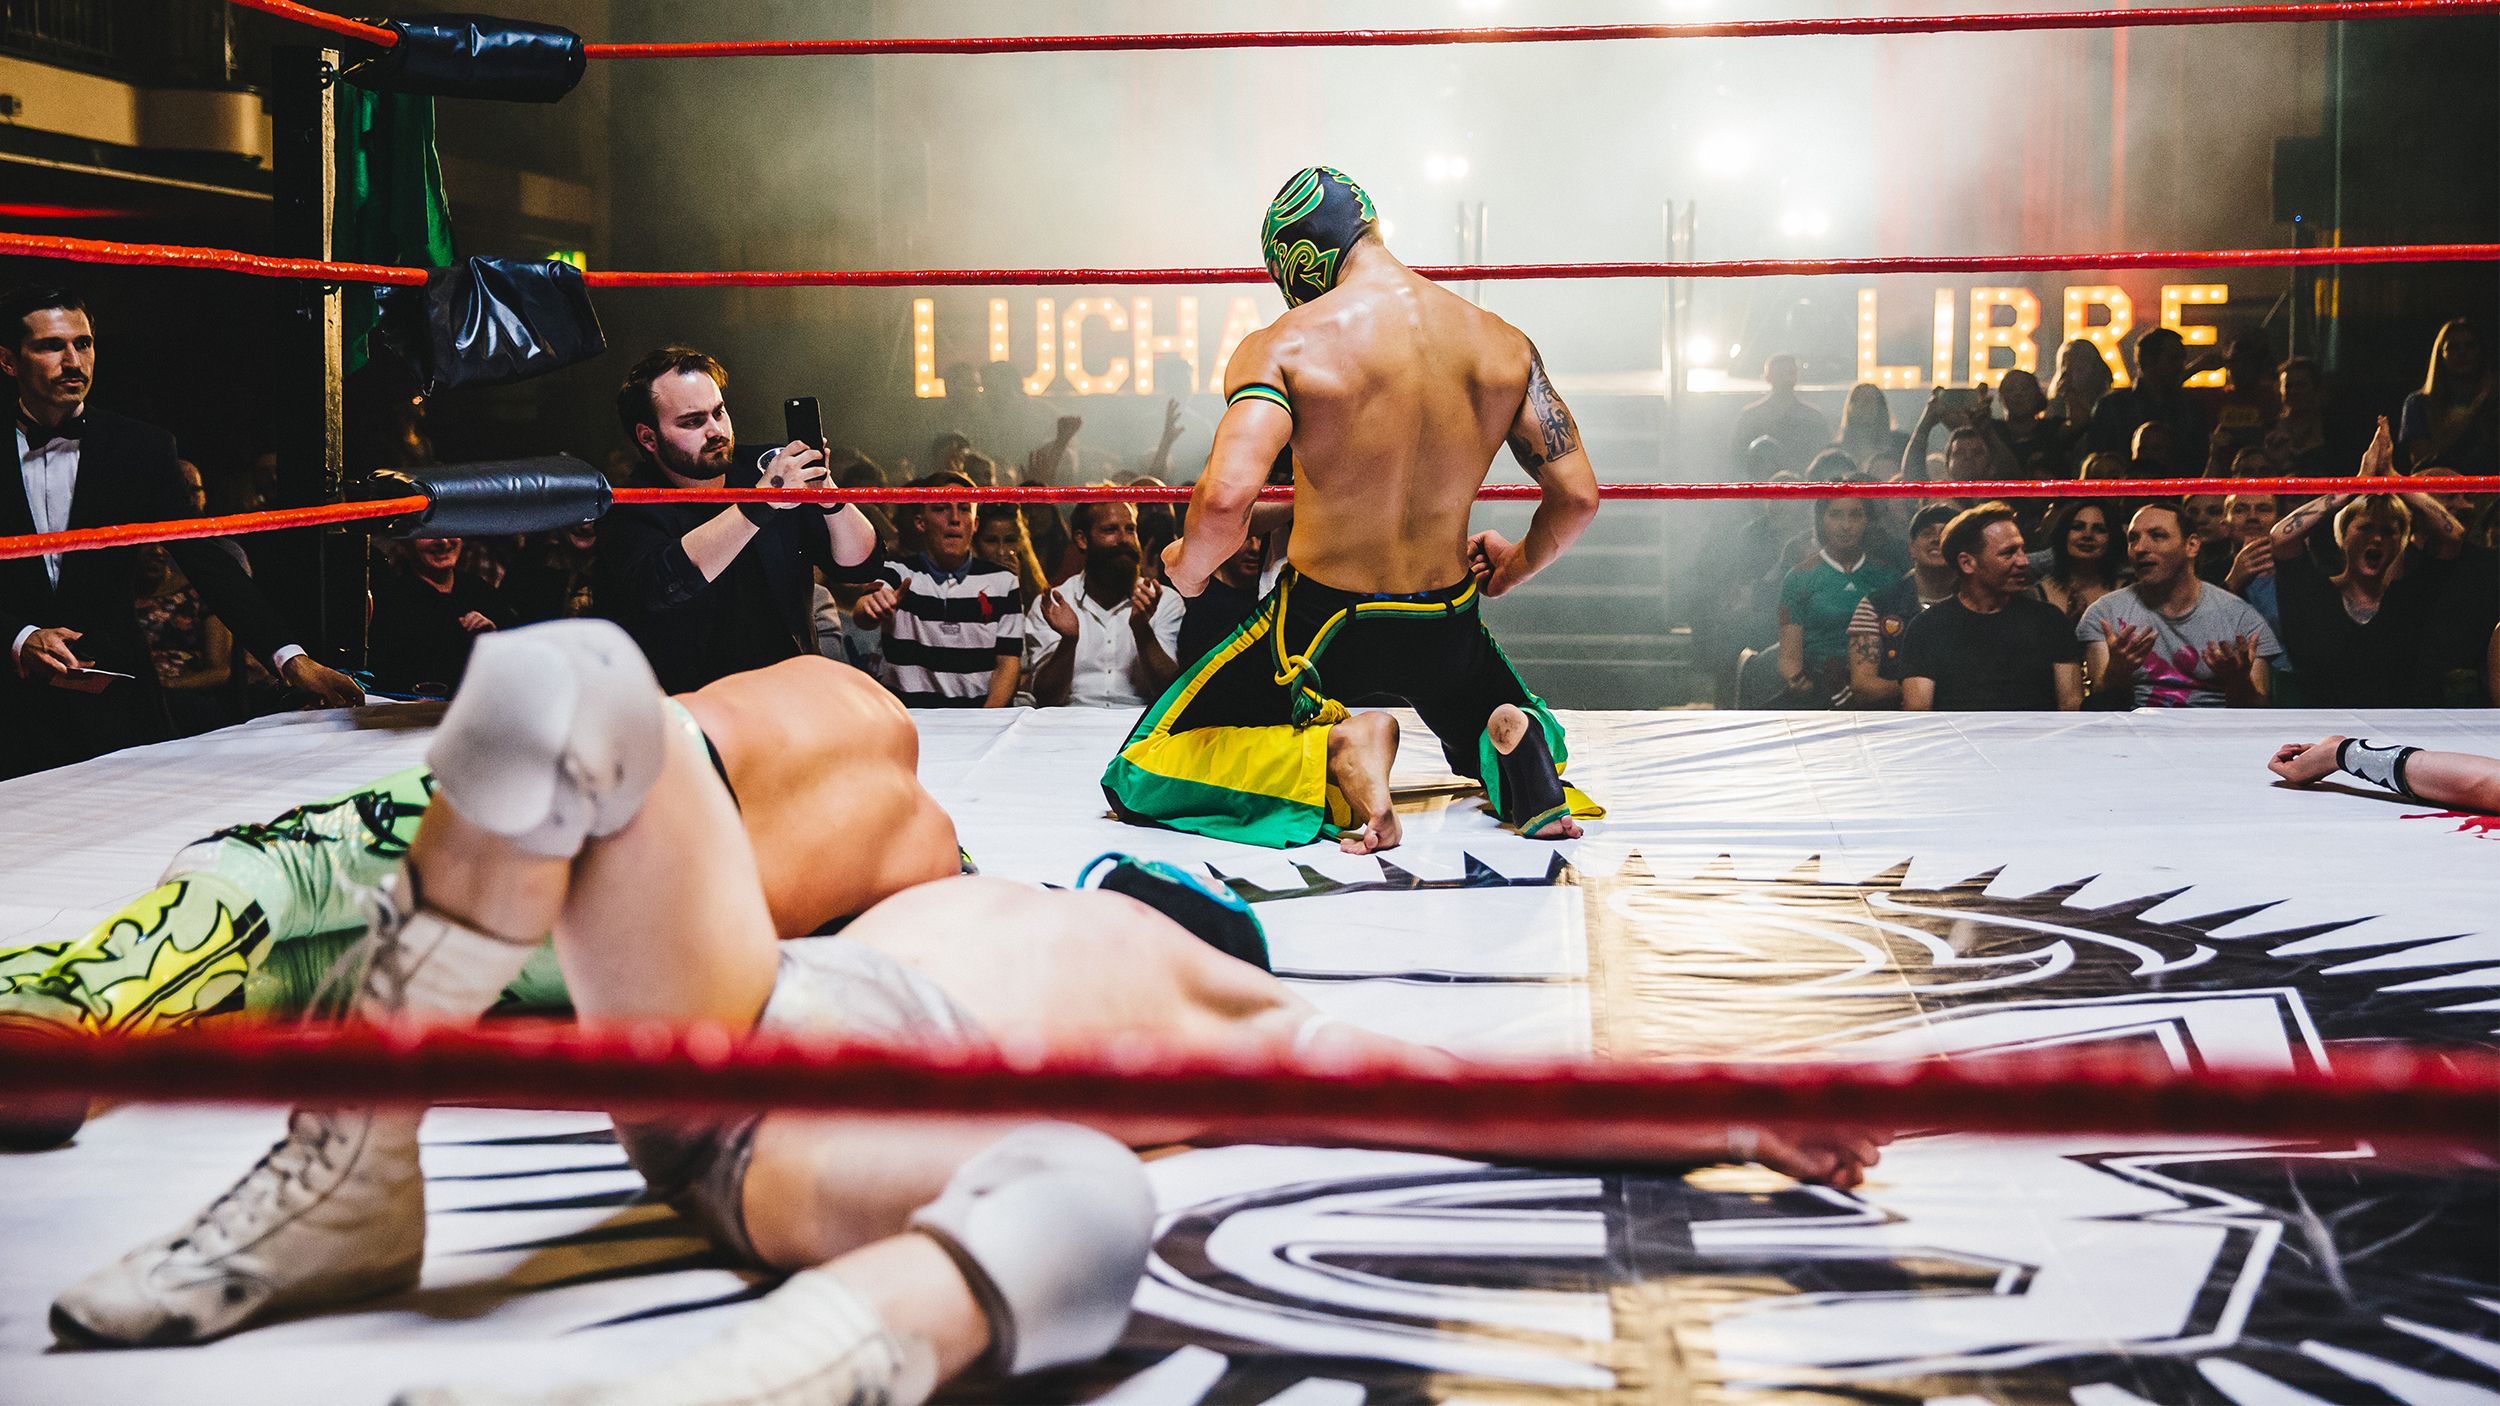 Blood and Glory The British Wrestlers Fighting in Lucha Libre